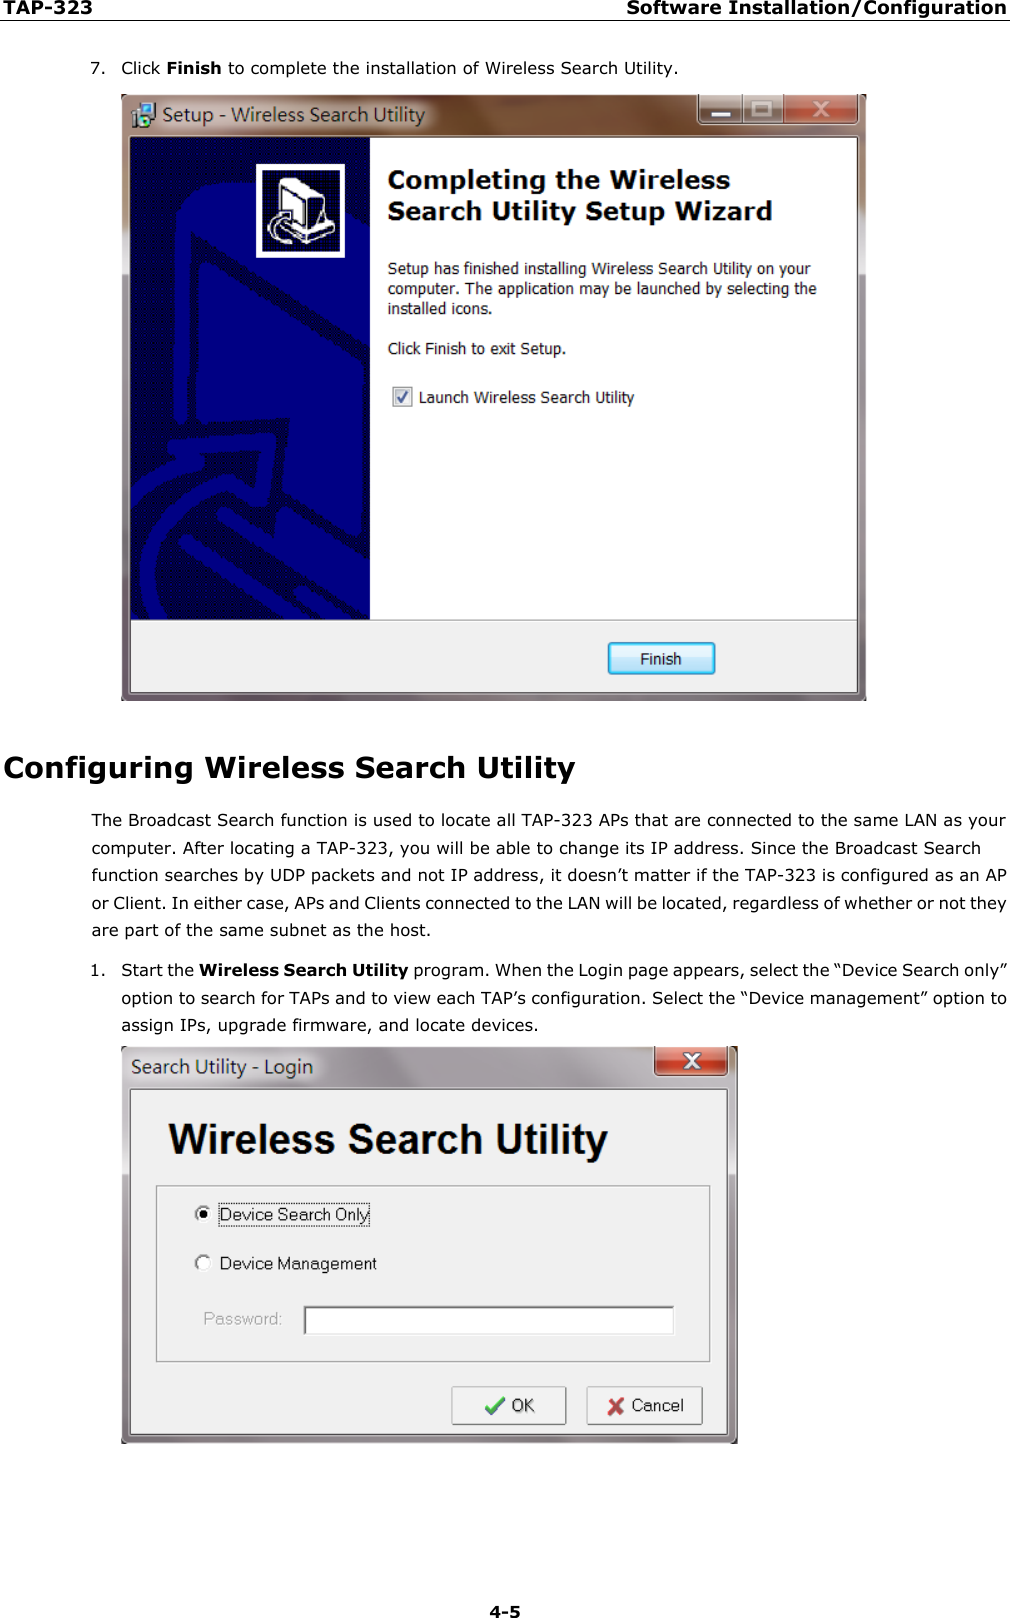 TAP-323 Software Installation/Configuration  4-5 7. Click Finish to complete the installation of Wireless Search Utility.  Configuring Wireless Search Utility The Broadcast Search function is used to locate all TAP-323 APs that are connected to the same LAN as your computer. After locating a TAP-323, you will be able to change its IP address. Since the Broadcast Search function searches by UDP packets and not IP address, it doesn’t matter if the TAP-323 is configured as an AP or Client. In either case, APs and Clients connected to the LAN will be located, regardless of whether or not they are part of the same subnet as the host. 1. Start the Wireless Search Utility program. When the Login page appears, select the “Device Search only” option to search for TAPs and to view each TAP’s configuration. Select the “Device management” option to assign IPs, upgrade firmware, and locate devices.      